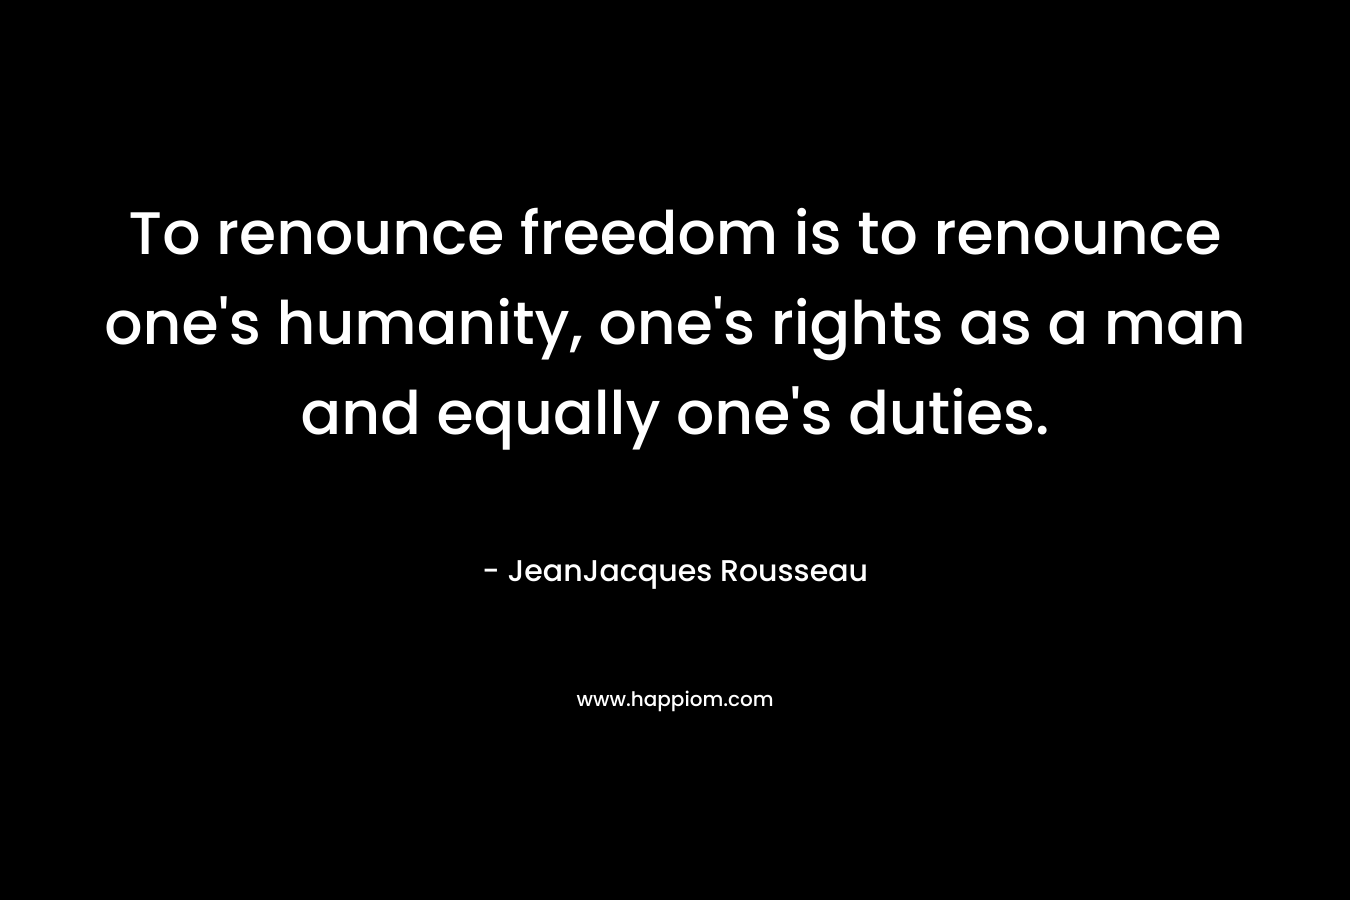 To renounce freedom is to renounce one’s humanity, one’s rights as a man and equally one’s duties. – JeanJacques Rousseau